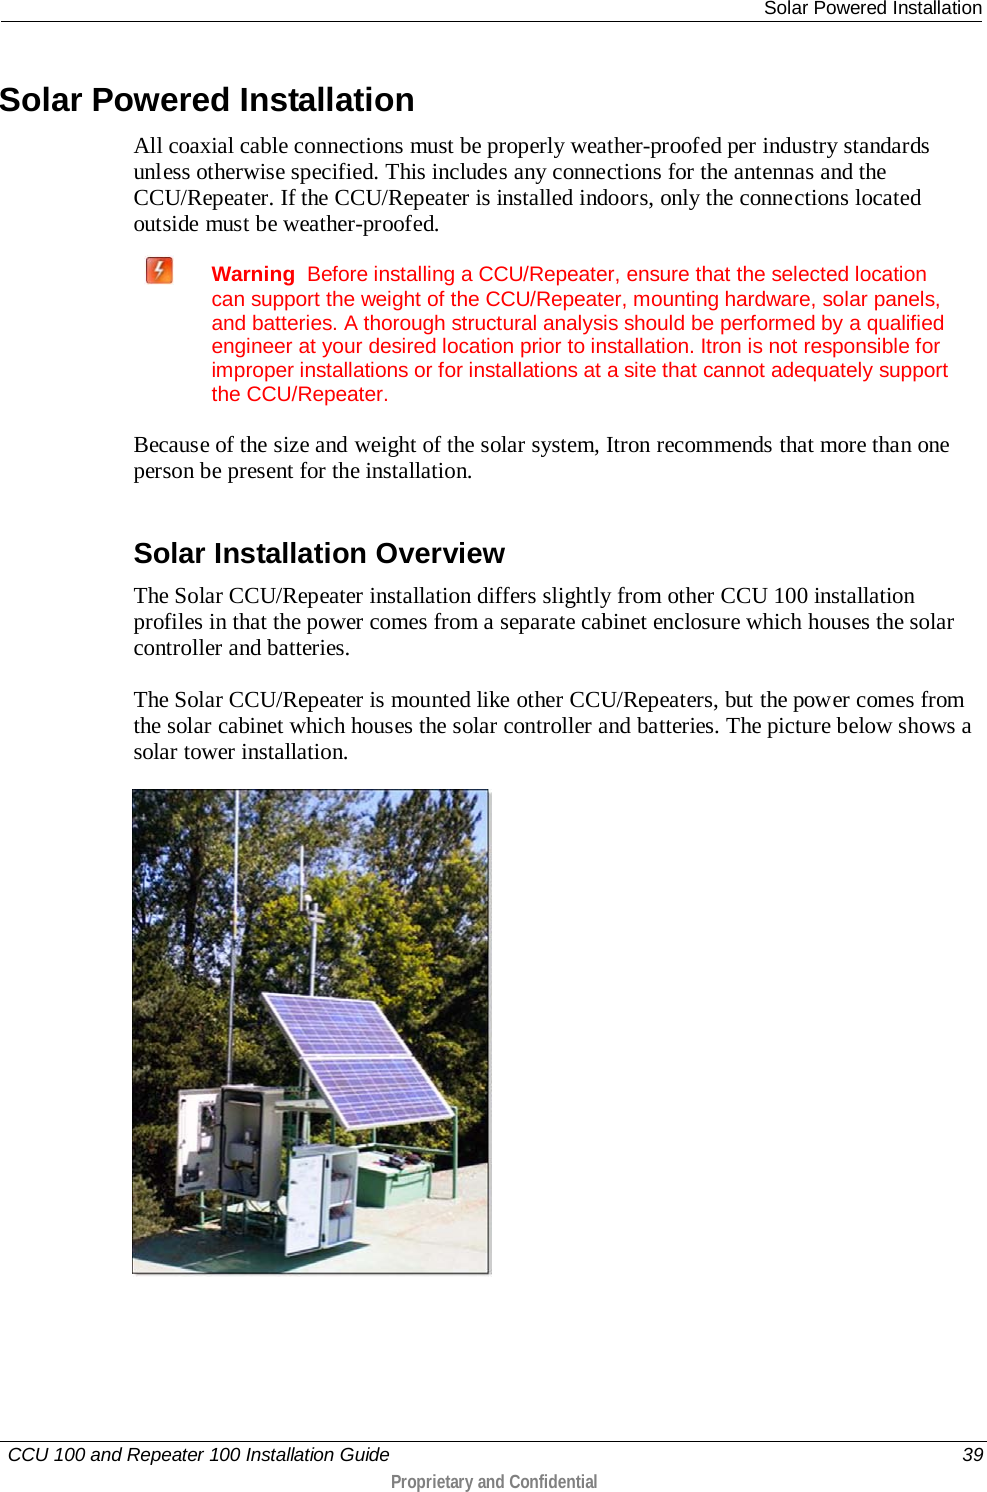  Solar Powered Installation   CCU 100 and Repeater 100 Installation Guide    39  Proprietary and Confidential   Solar Powered Installation All coaxial cable connections must be properly weather-proofed per industry standards unless otherwise specified. This includes any connections for the antennas and the CCU/Repeater. If the CCU/Repeater is installed indoors, only the connections located outside must be weather-proofed.  Warning  Before installing a CCU/Repeater, ensure that the selected location can support the weight of the CCU/Repeater, mounting hardware, solar panels, and batteries. A thorough structural analysis should be performed by a qualified engineer at your desired location prior to installation. Itron is not responsible for improper installations or for installations at a site that cannot adequately support the CCU/Repeater.  Because of the size and weight of the solar system, Itron recommends that more than one person be present for the installation.  Solar Installation Overview The Solar CCU/Repeater installation differs slightly from other CCU 100 installation profiles in that the power comes from a separate cabinet enclosure which houses the solar controller and batteries.  The Solar CCU/Repeater is mounted like other CCU/Repeaters, but the power comes from the solar cabinet which houses the solar controller and batteries. The picture below shows a solar tower installation.   